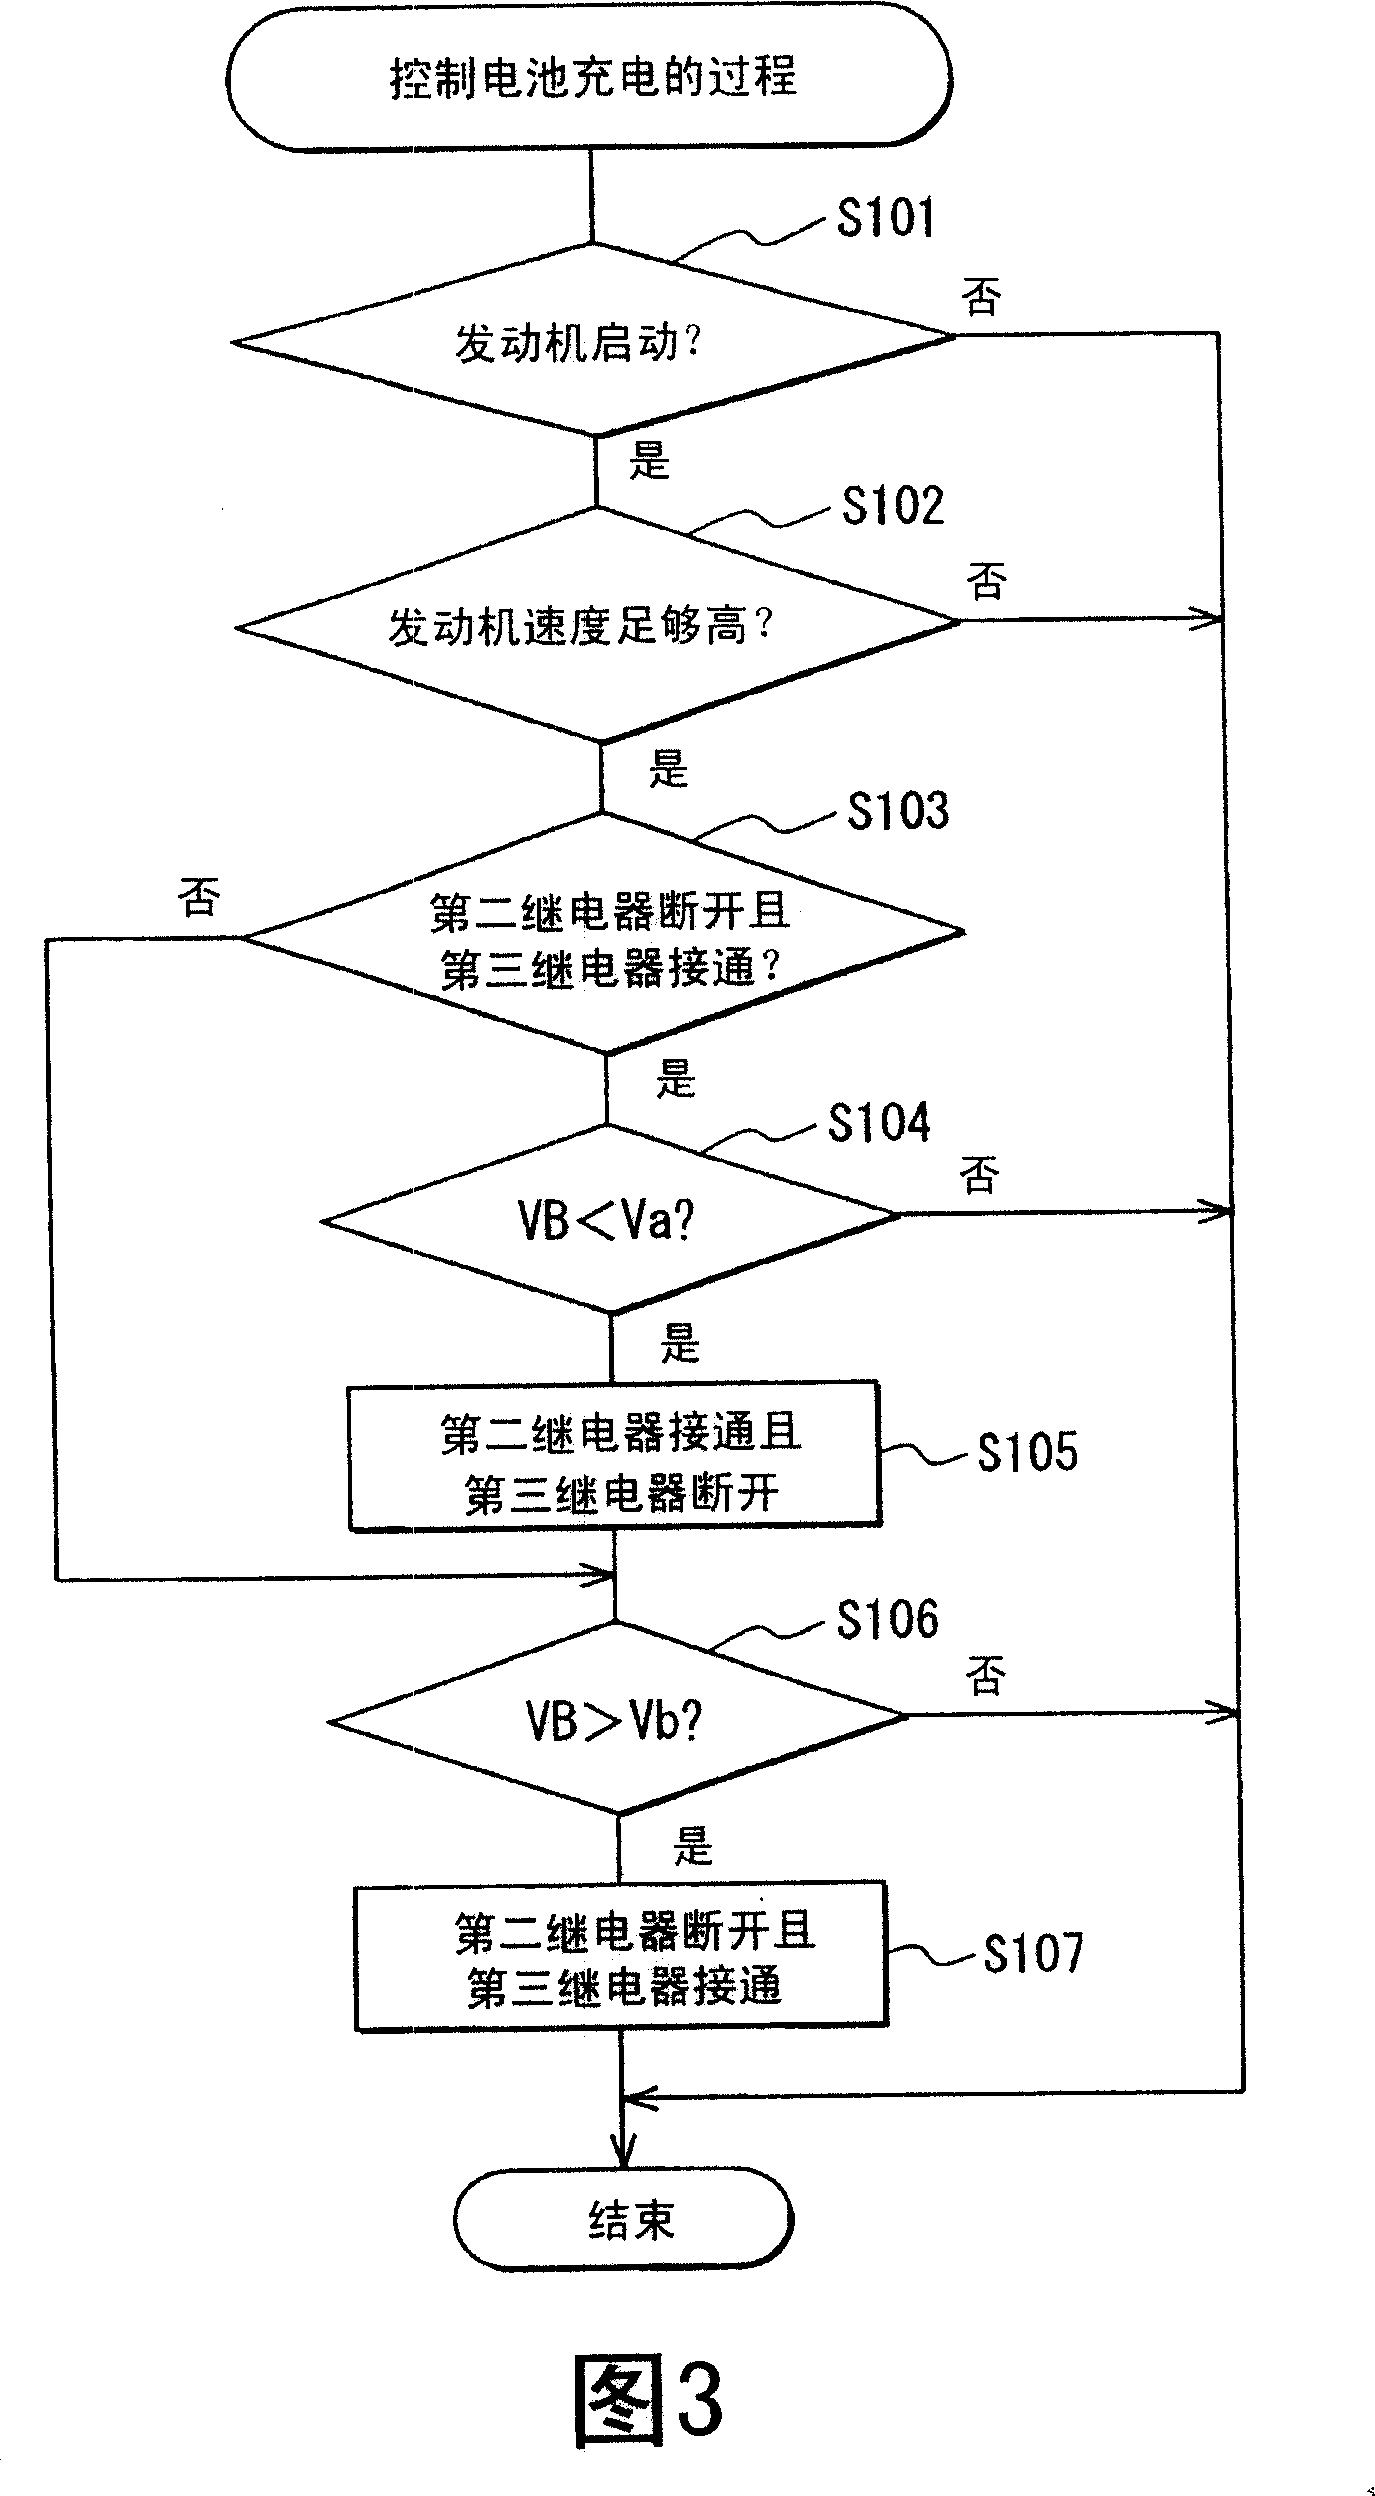 Power supply system for automobile